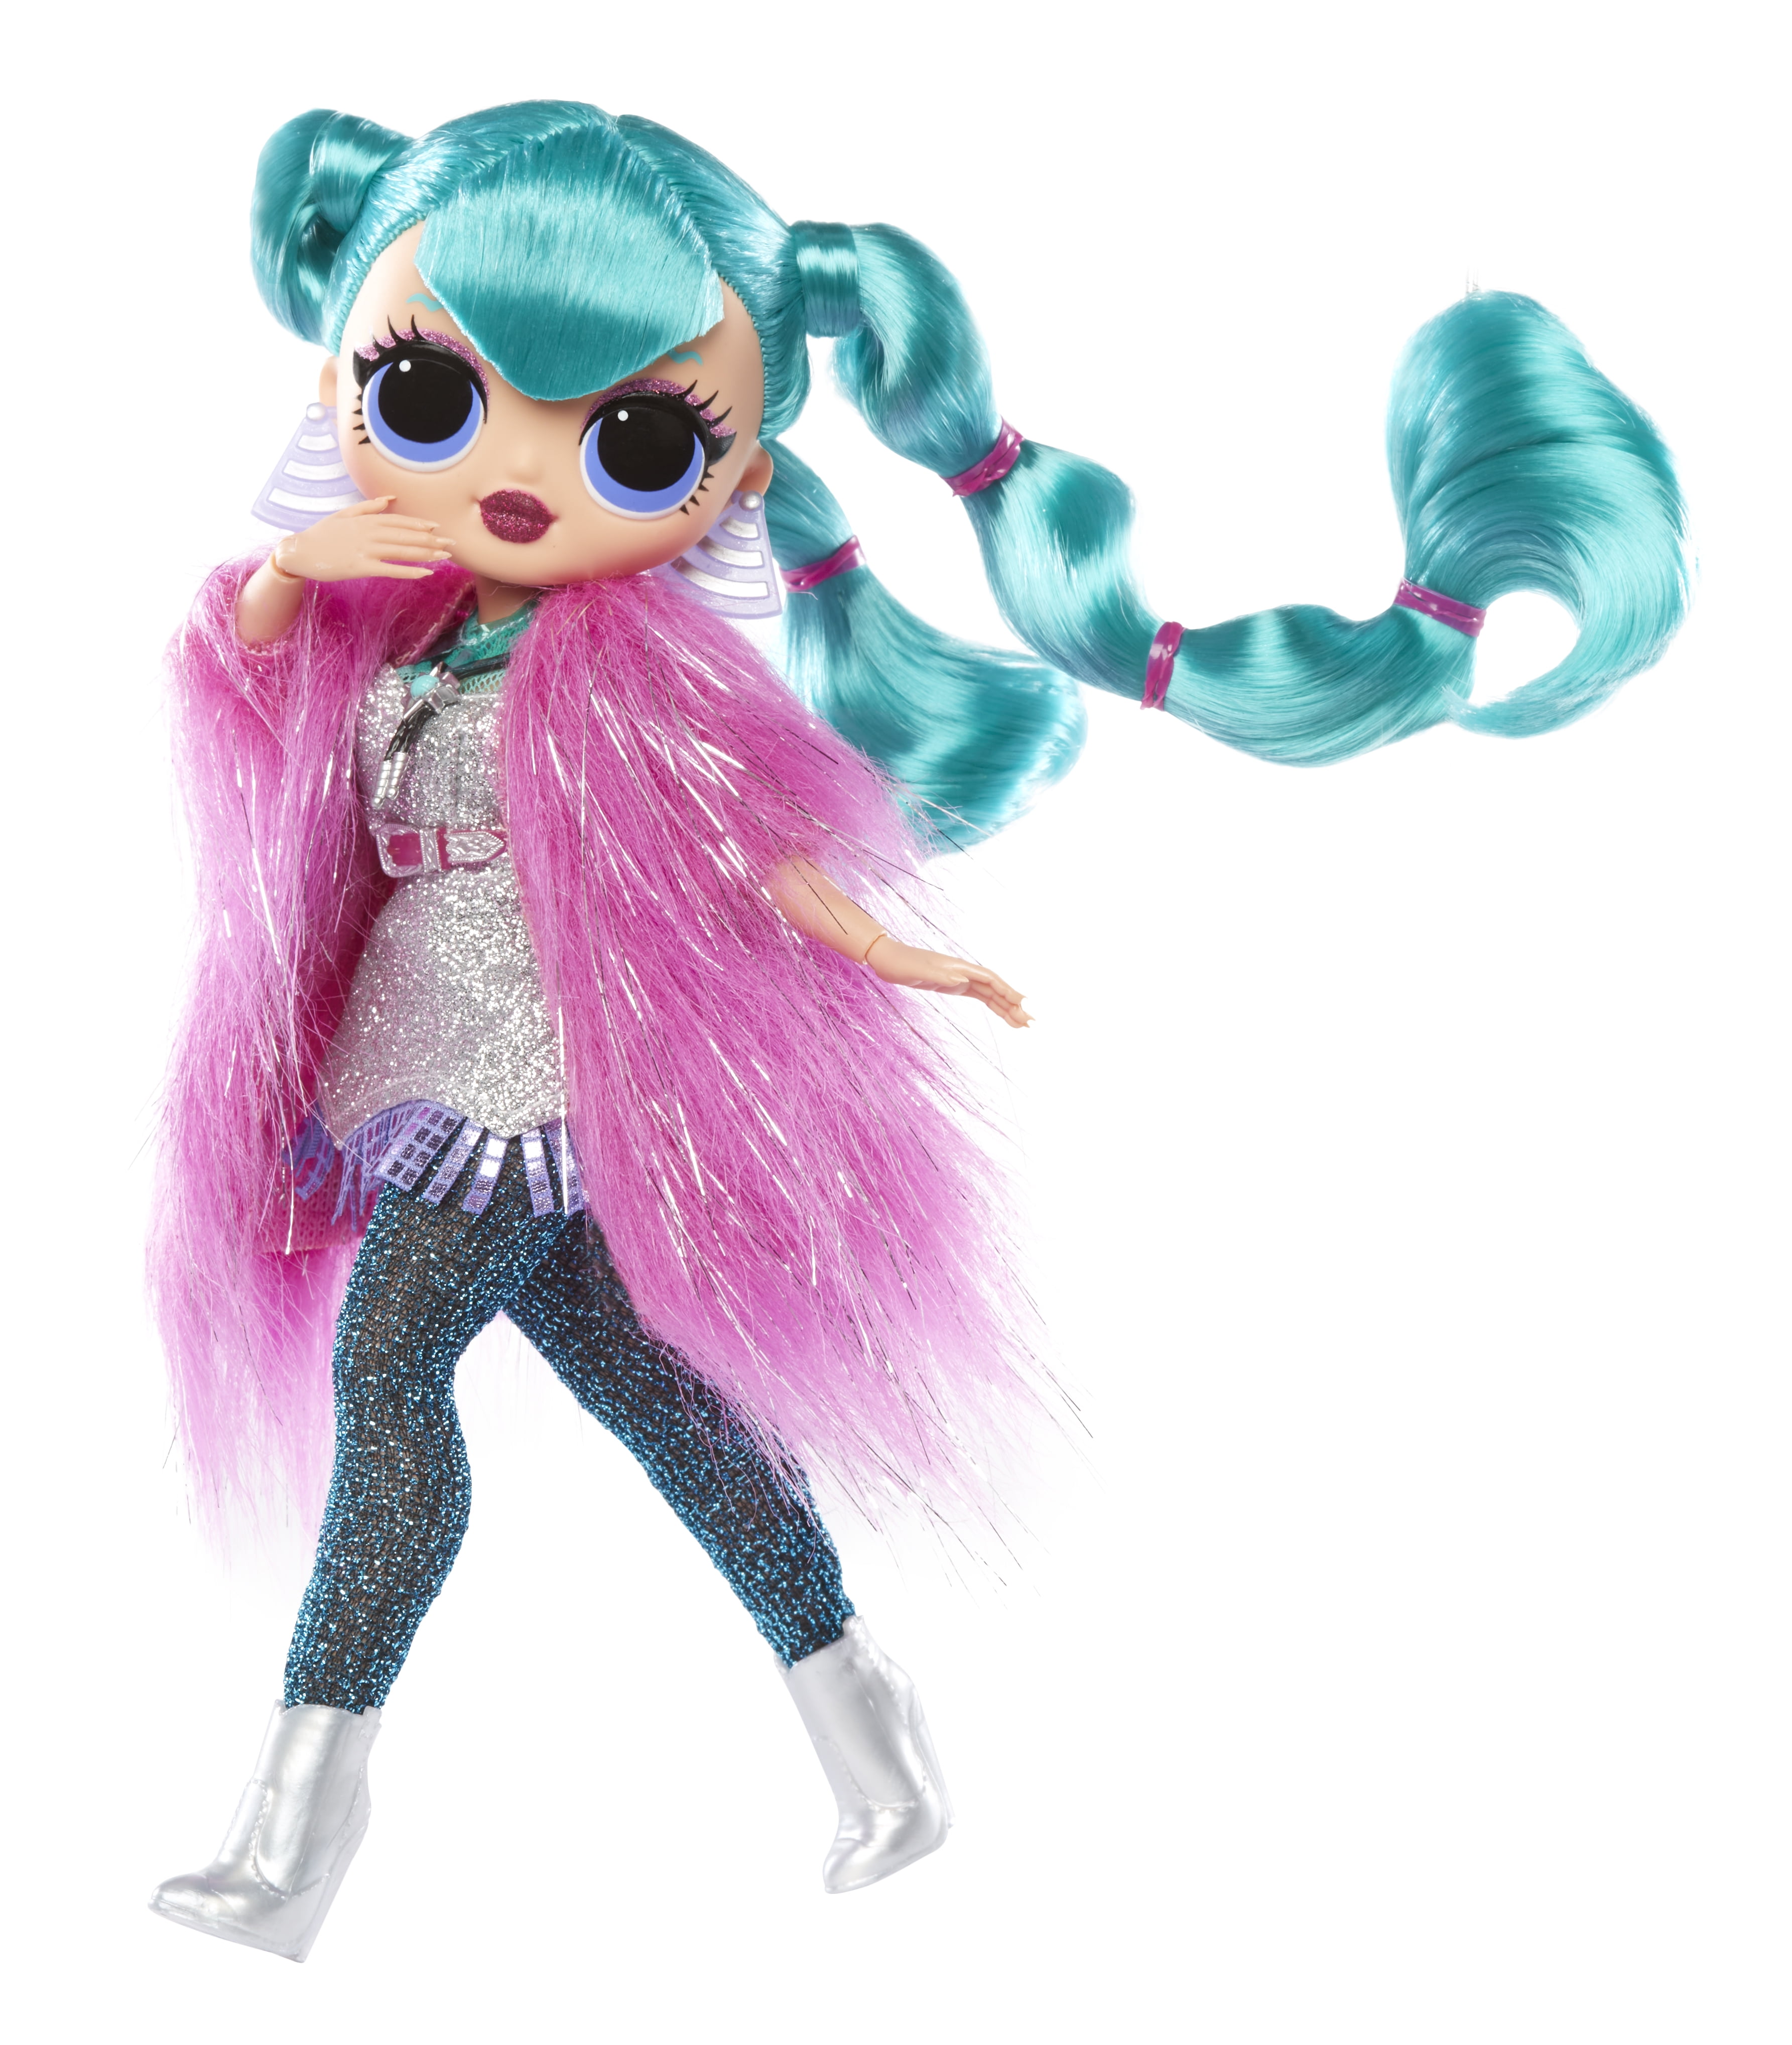 LOL Surprise! OMG Fierce Swag 11.5 Fashion Doll with X Surprises Including  Accessories & Outfits, Holiday Toy, Great Gift for Kids Girls Boys Ages 4